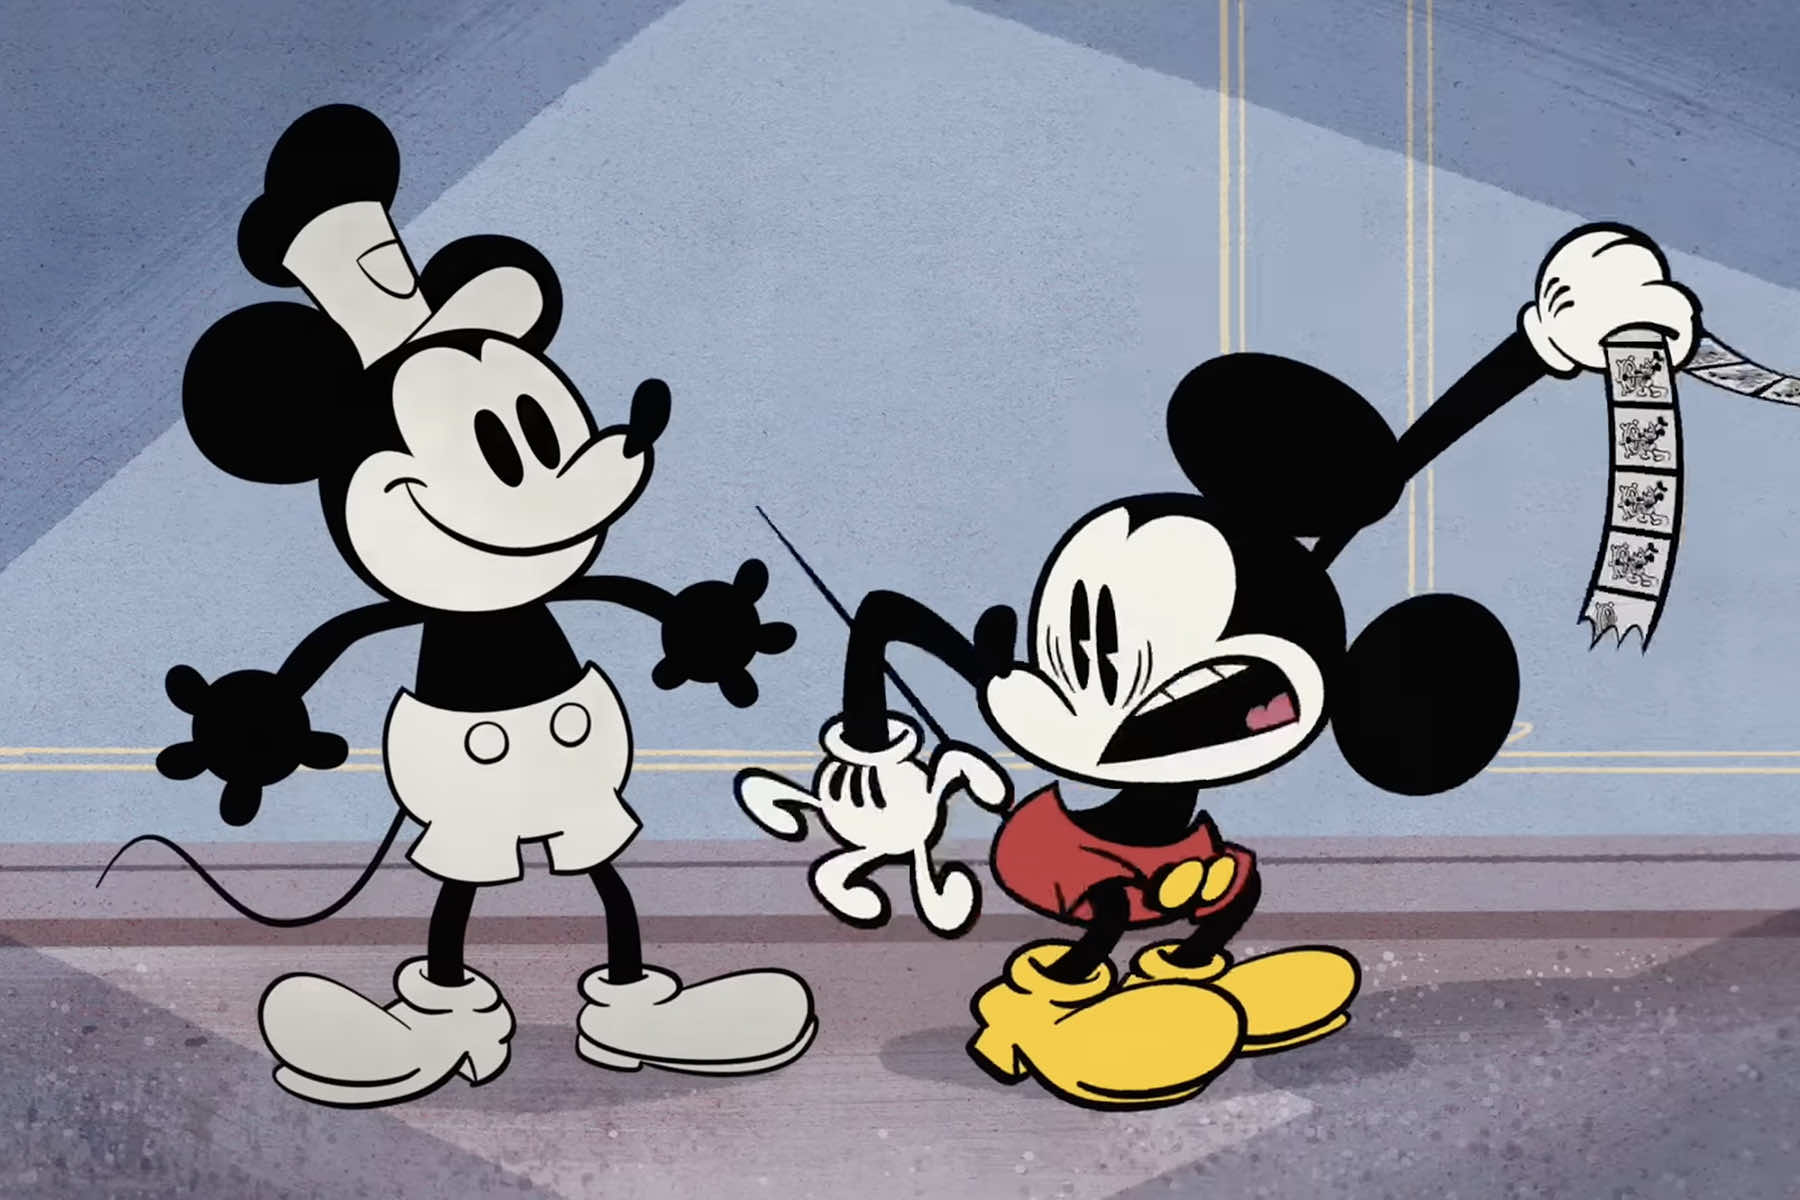 Earliest version of Mickey Mouse joins other iconic characters to